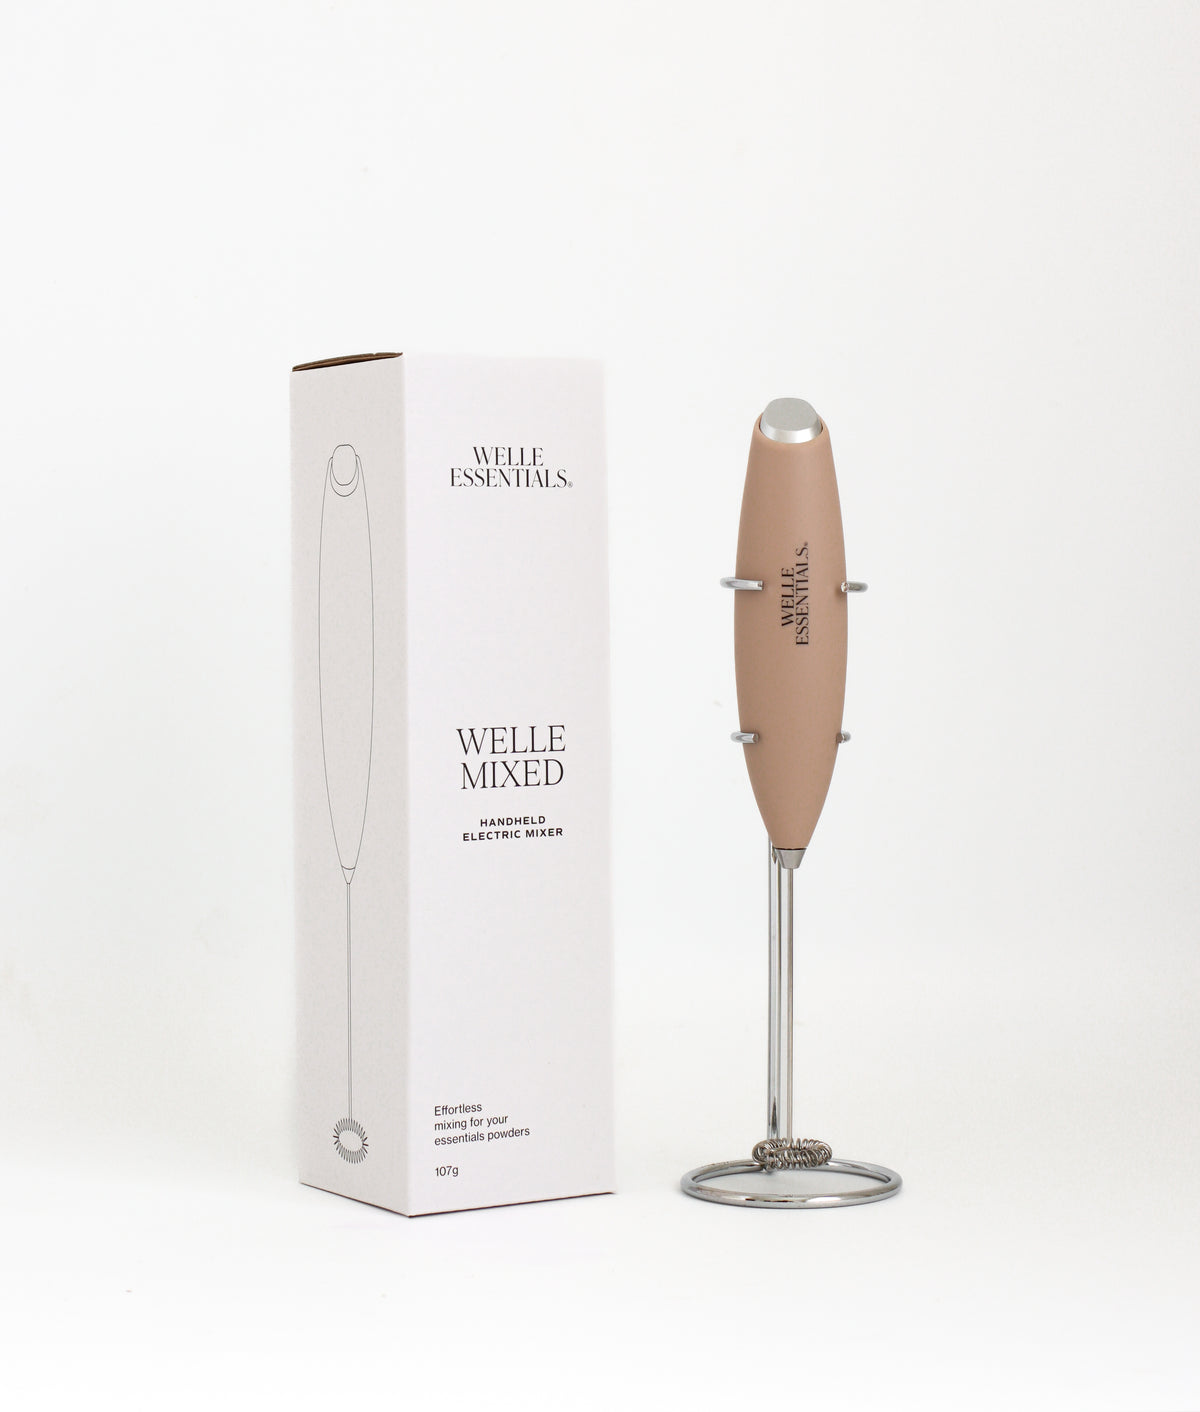 Welle Mixed (Latte) - Electric Mixer Whisk